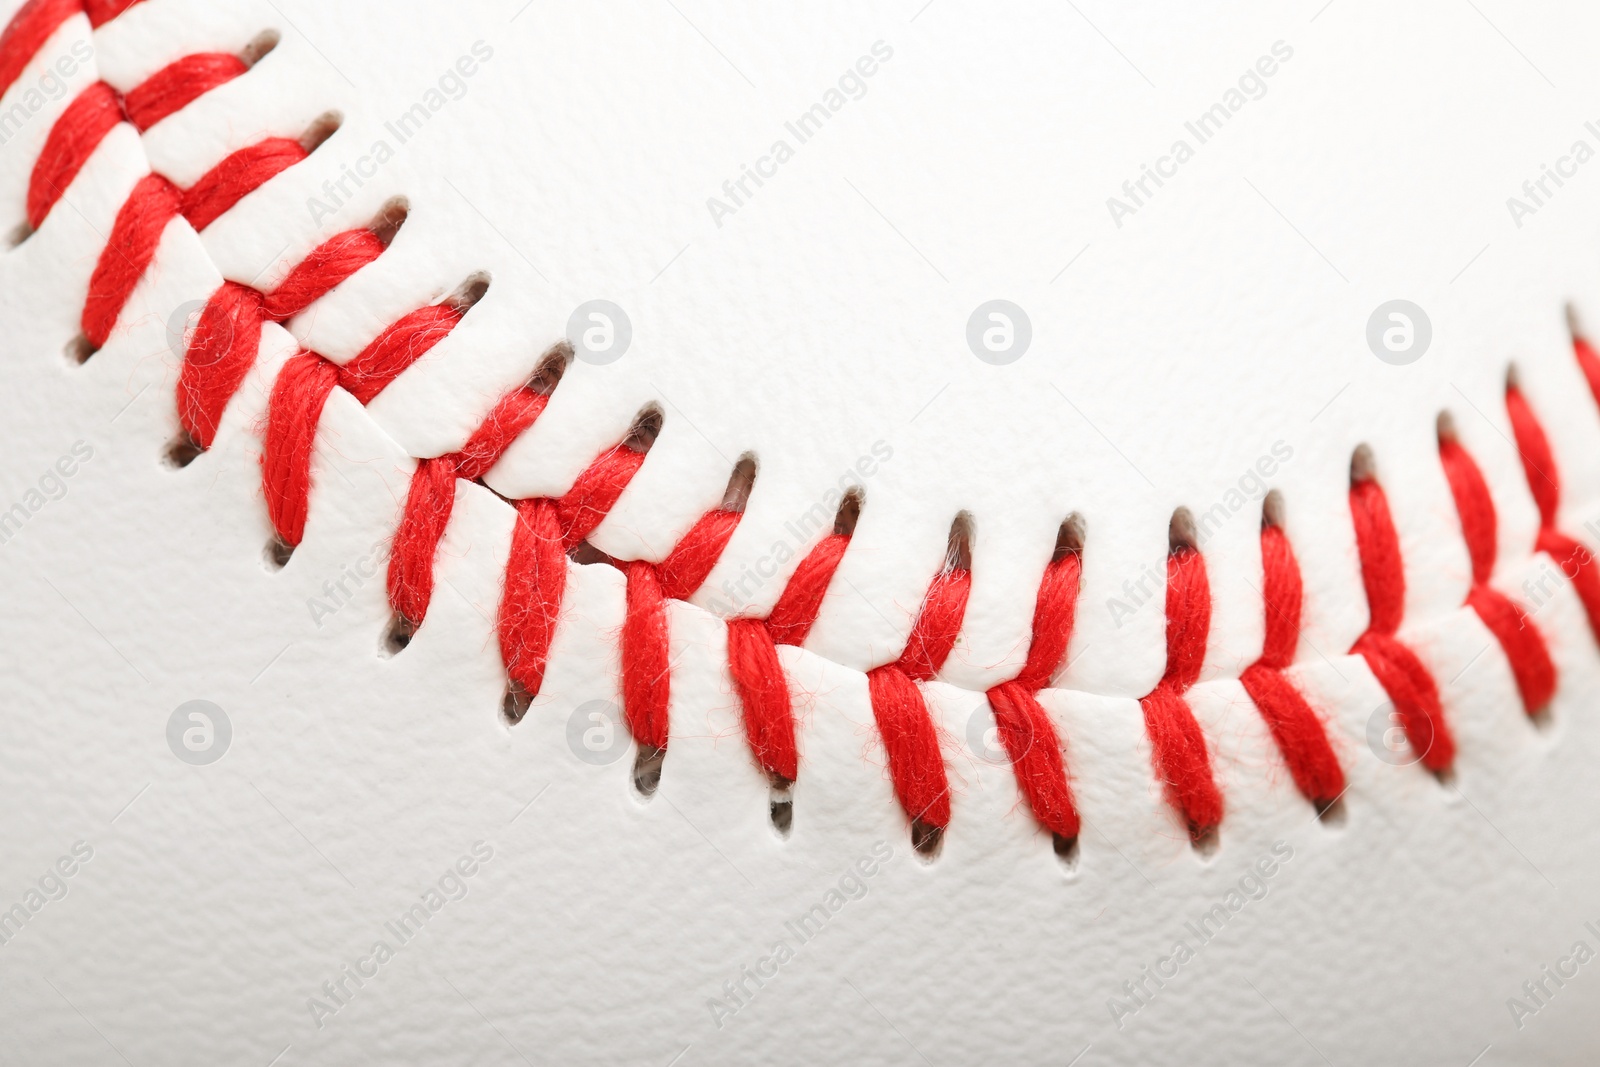 Photo of Baseball ball with stitches as background, closeup